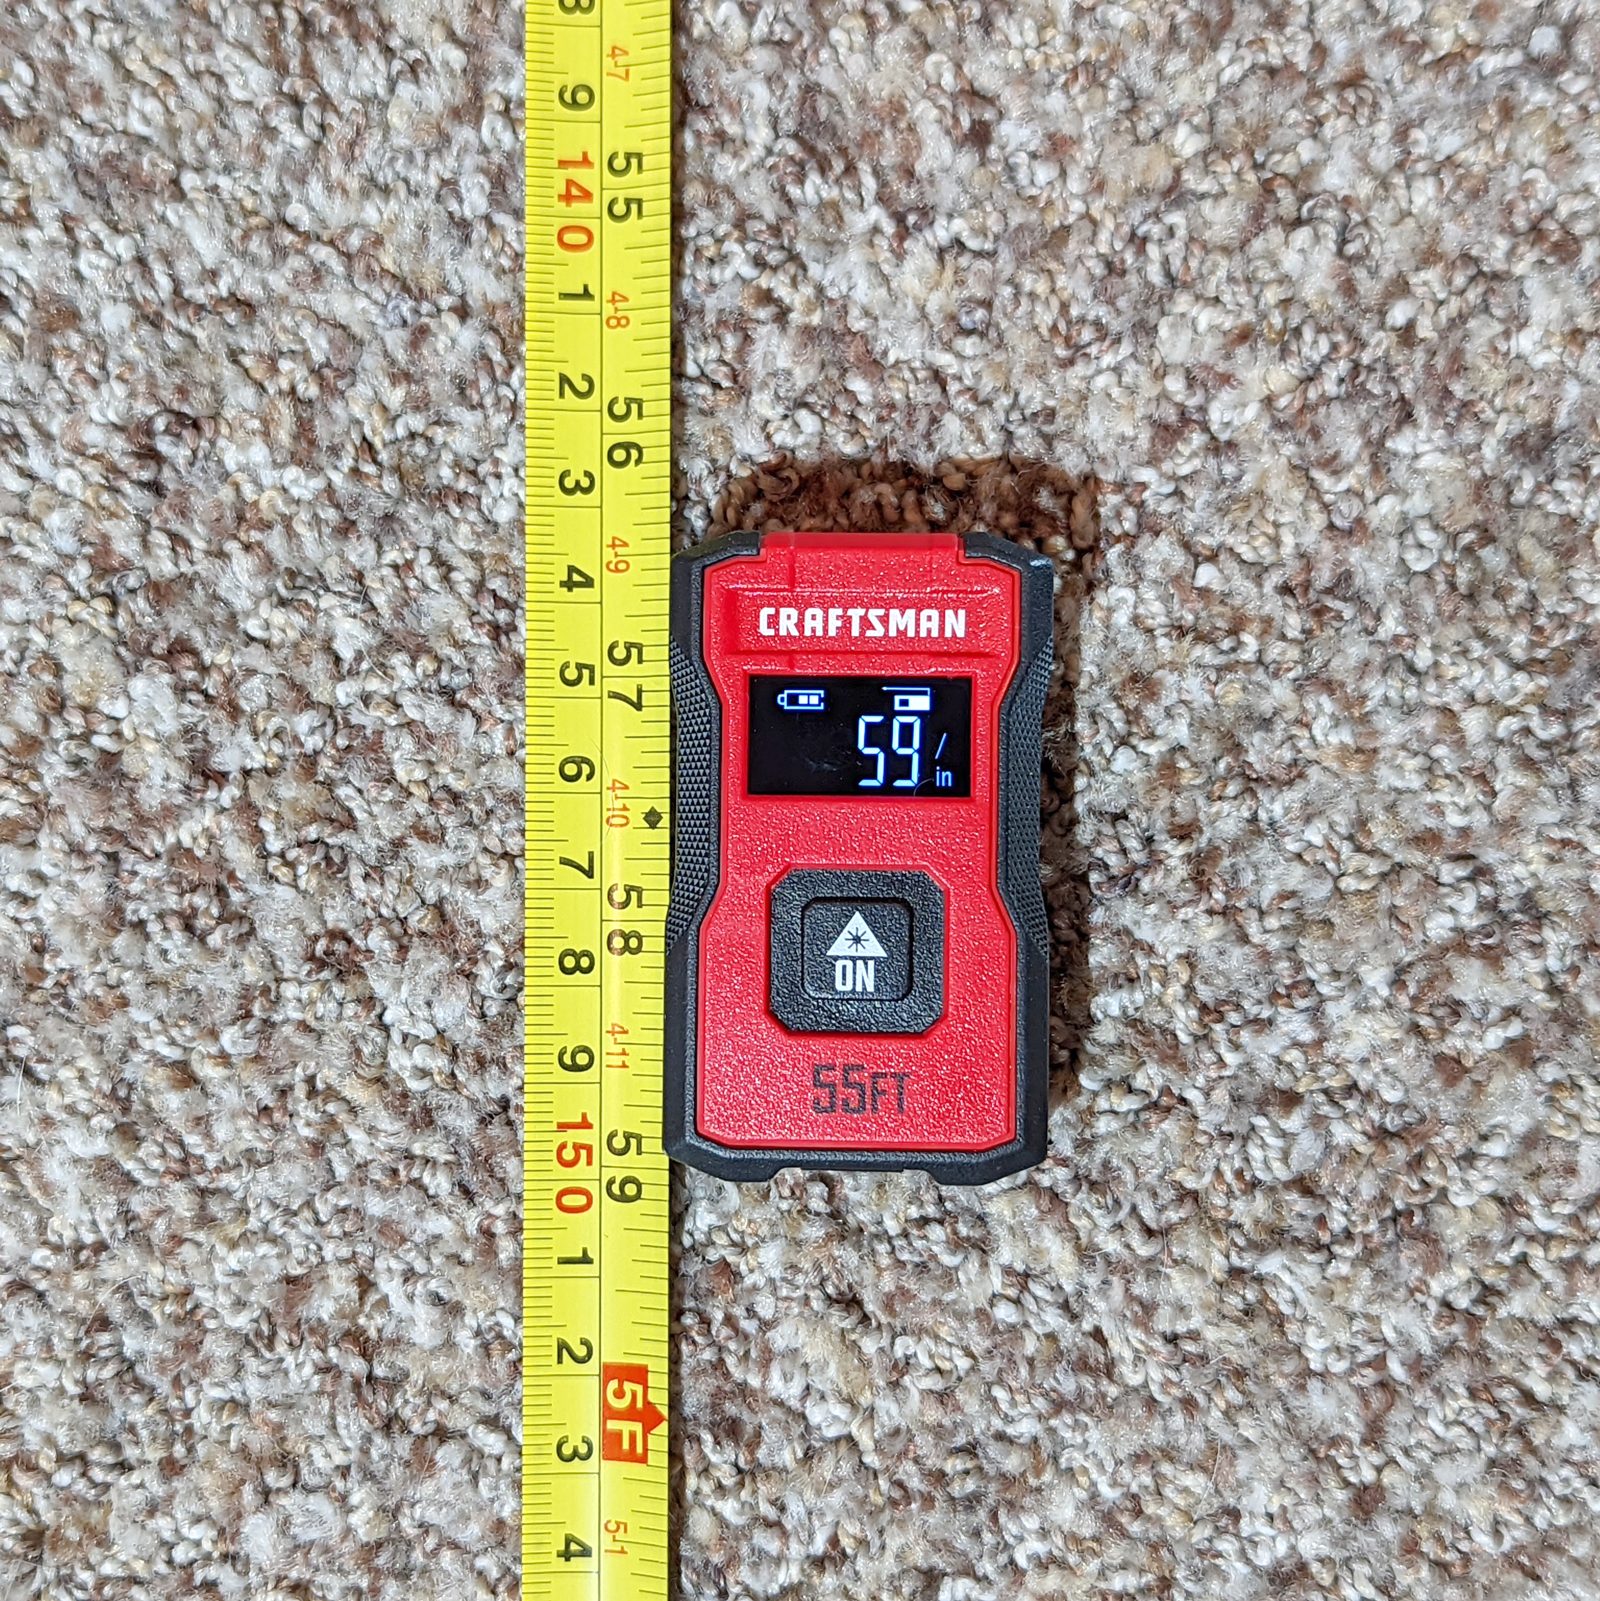 Craftsman Ldm next to a yellow tape measure showing it is 2.5 inches long